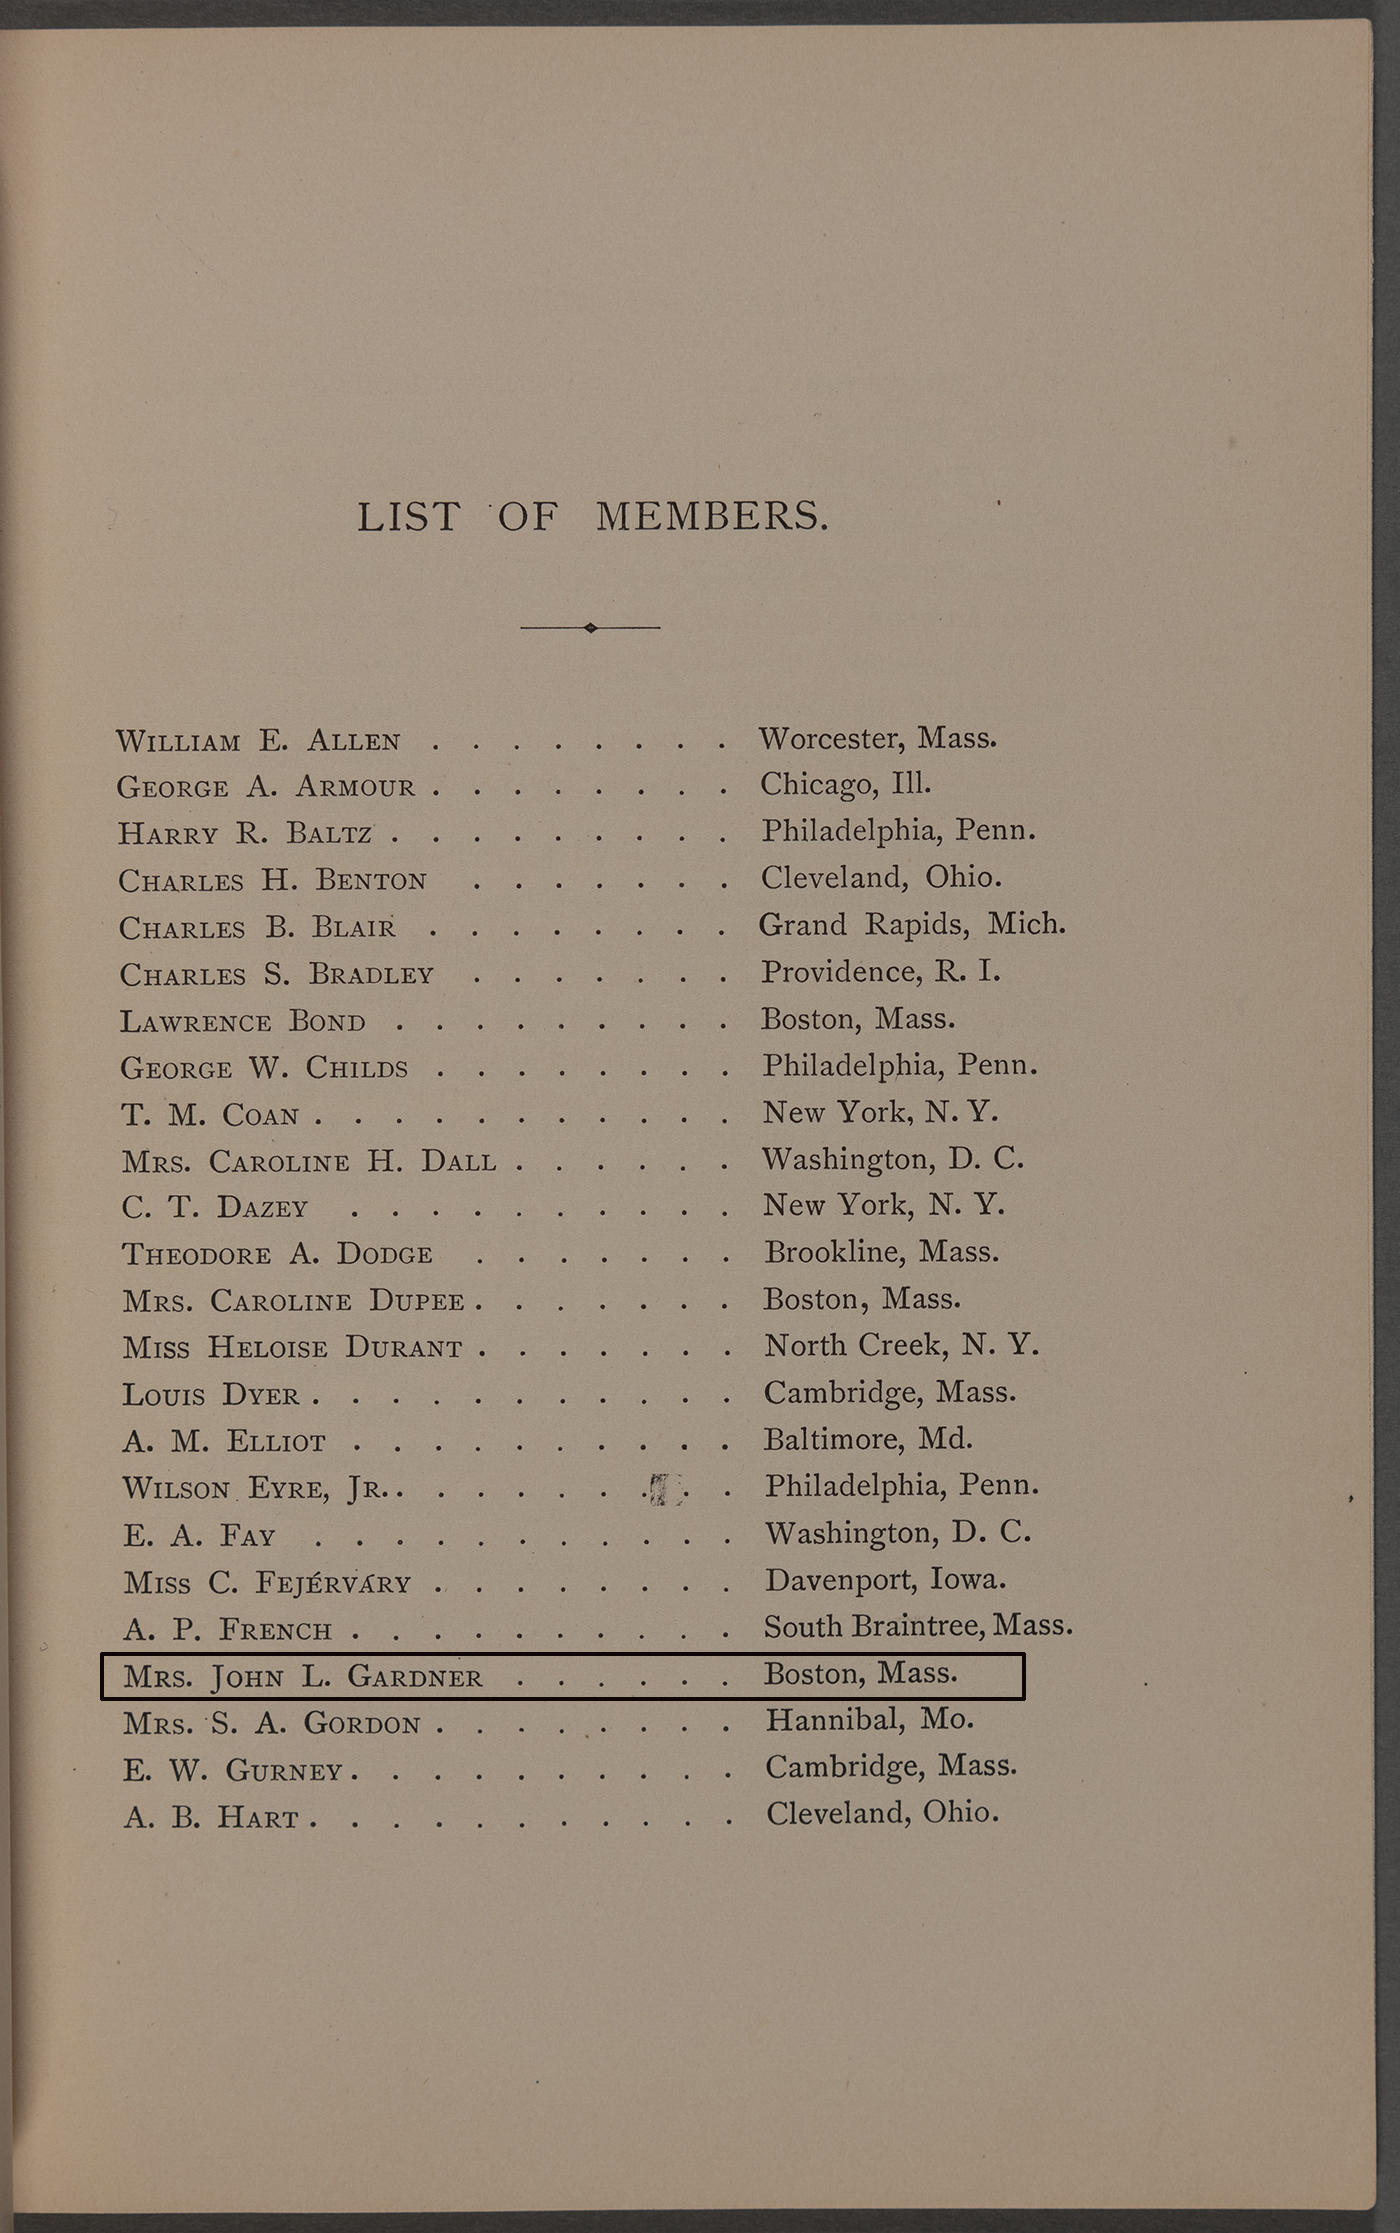 A list of members of the Dante Society in 1881.